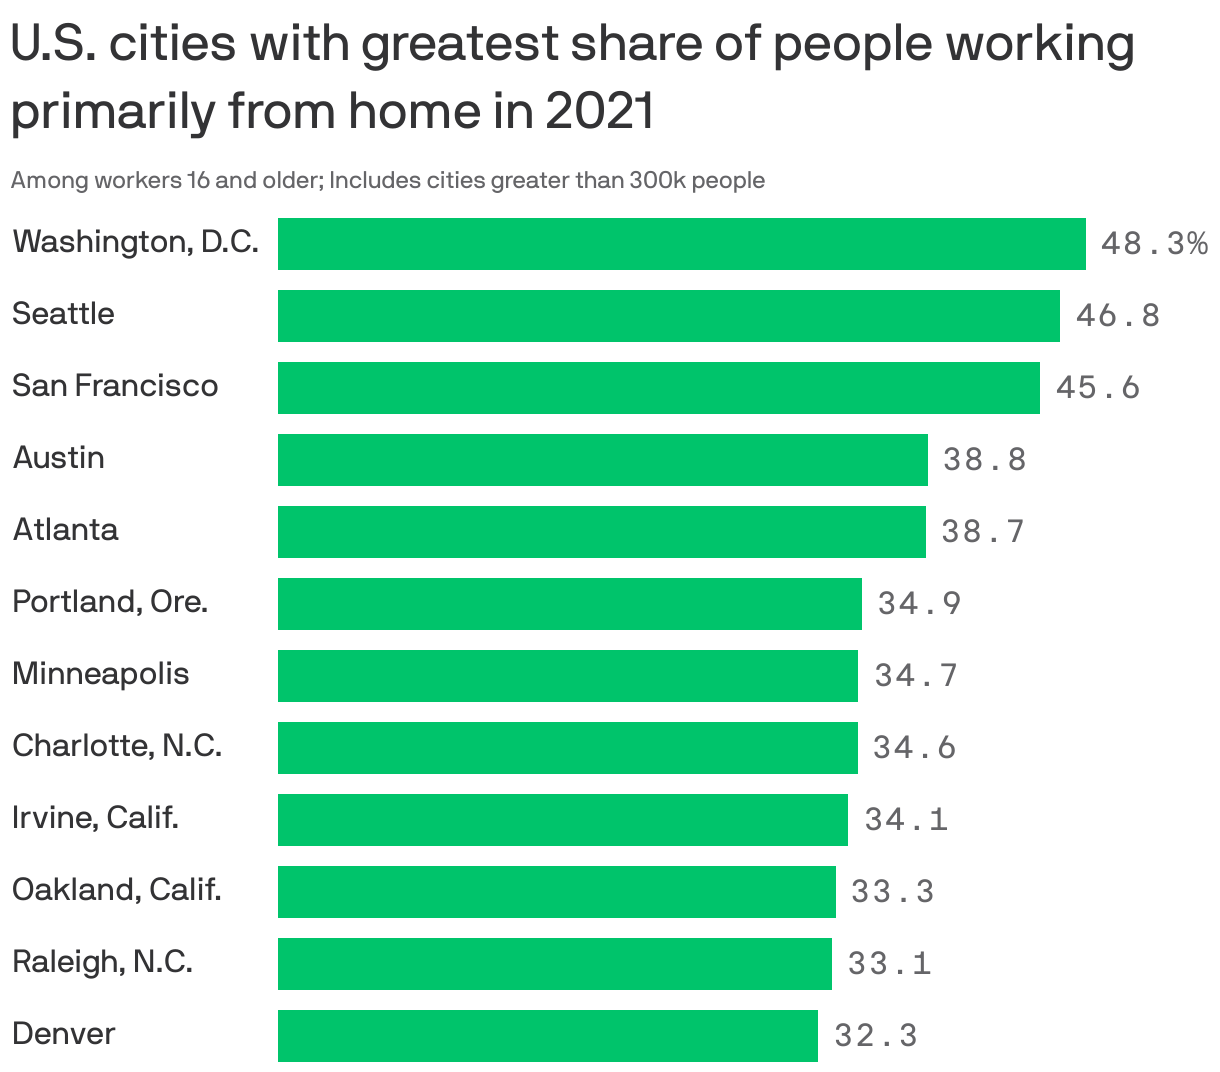 U.S. cities with greatest share of people working primarily from home in 2021